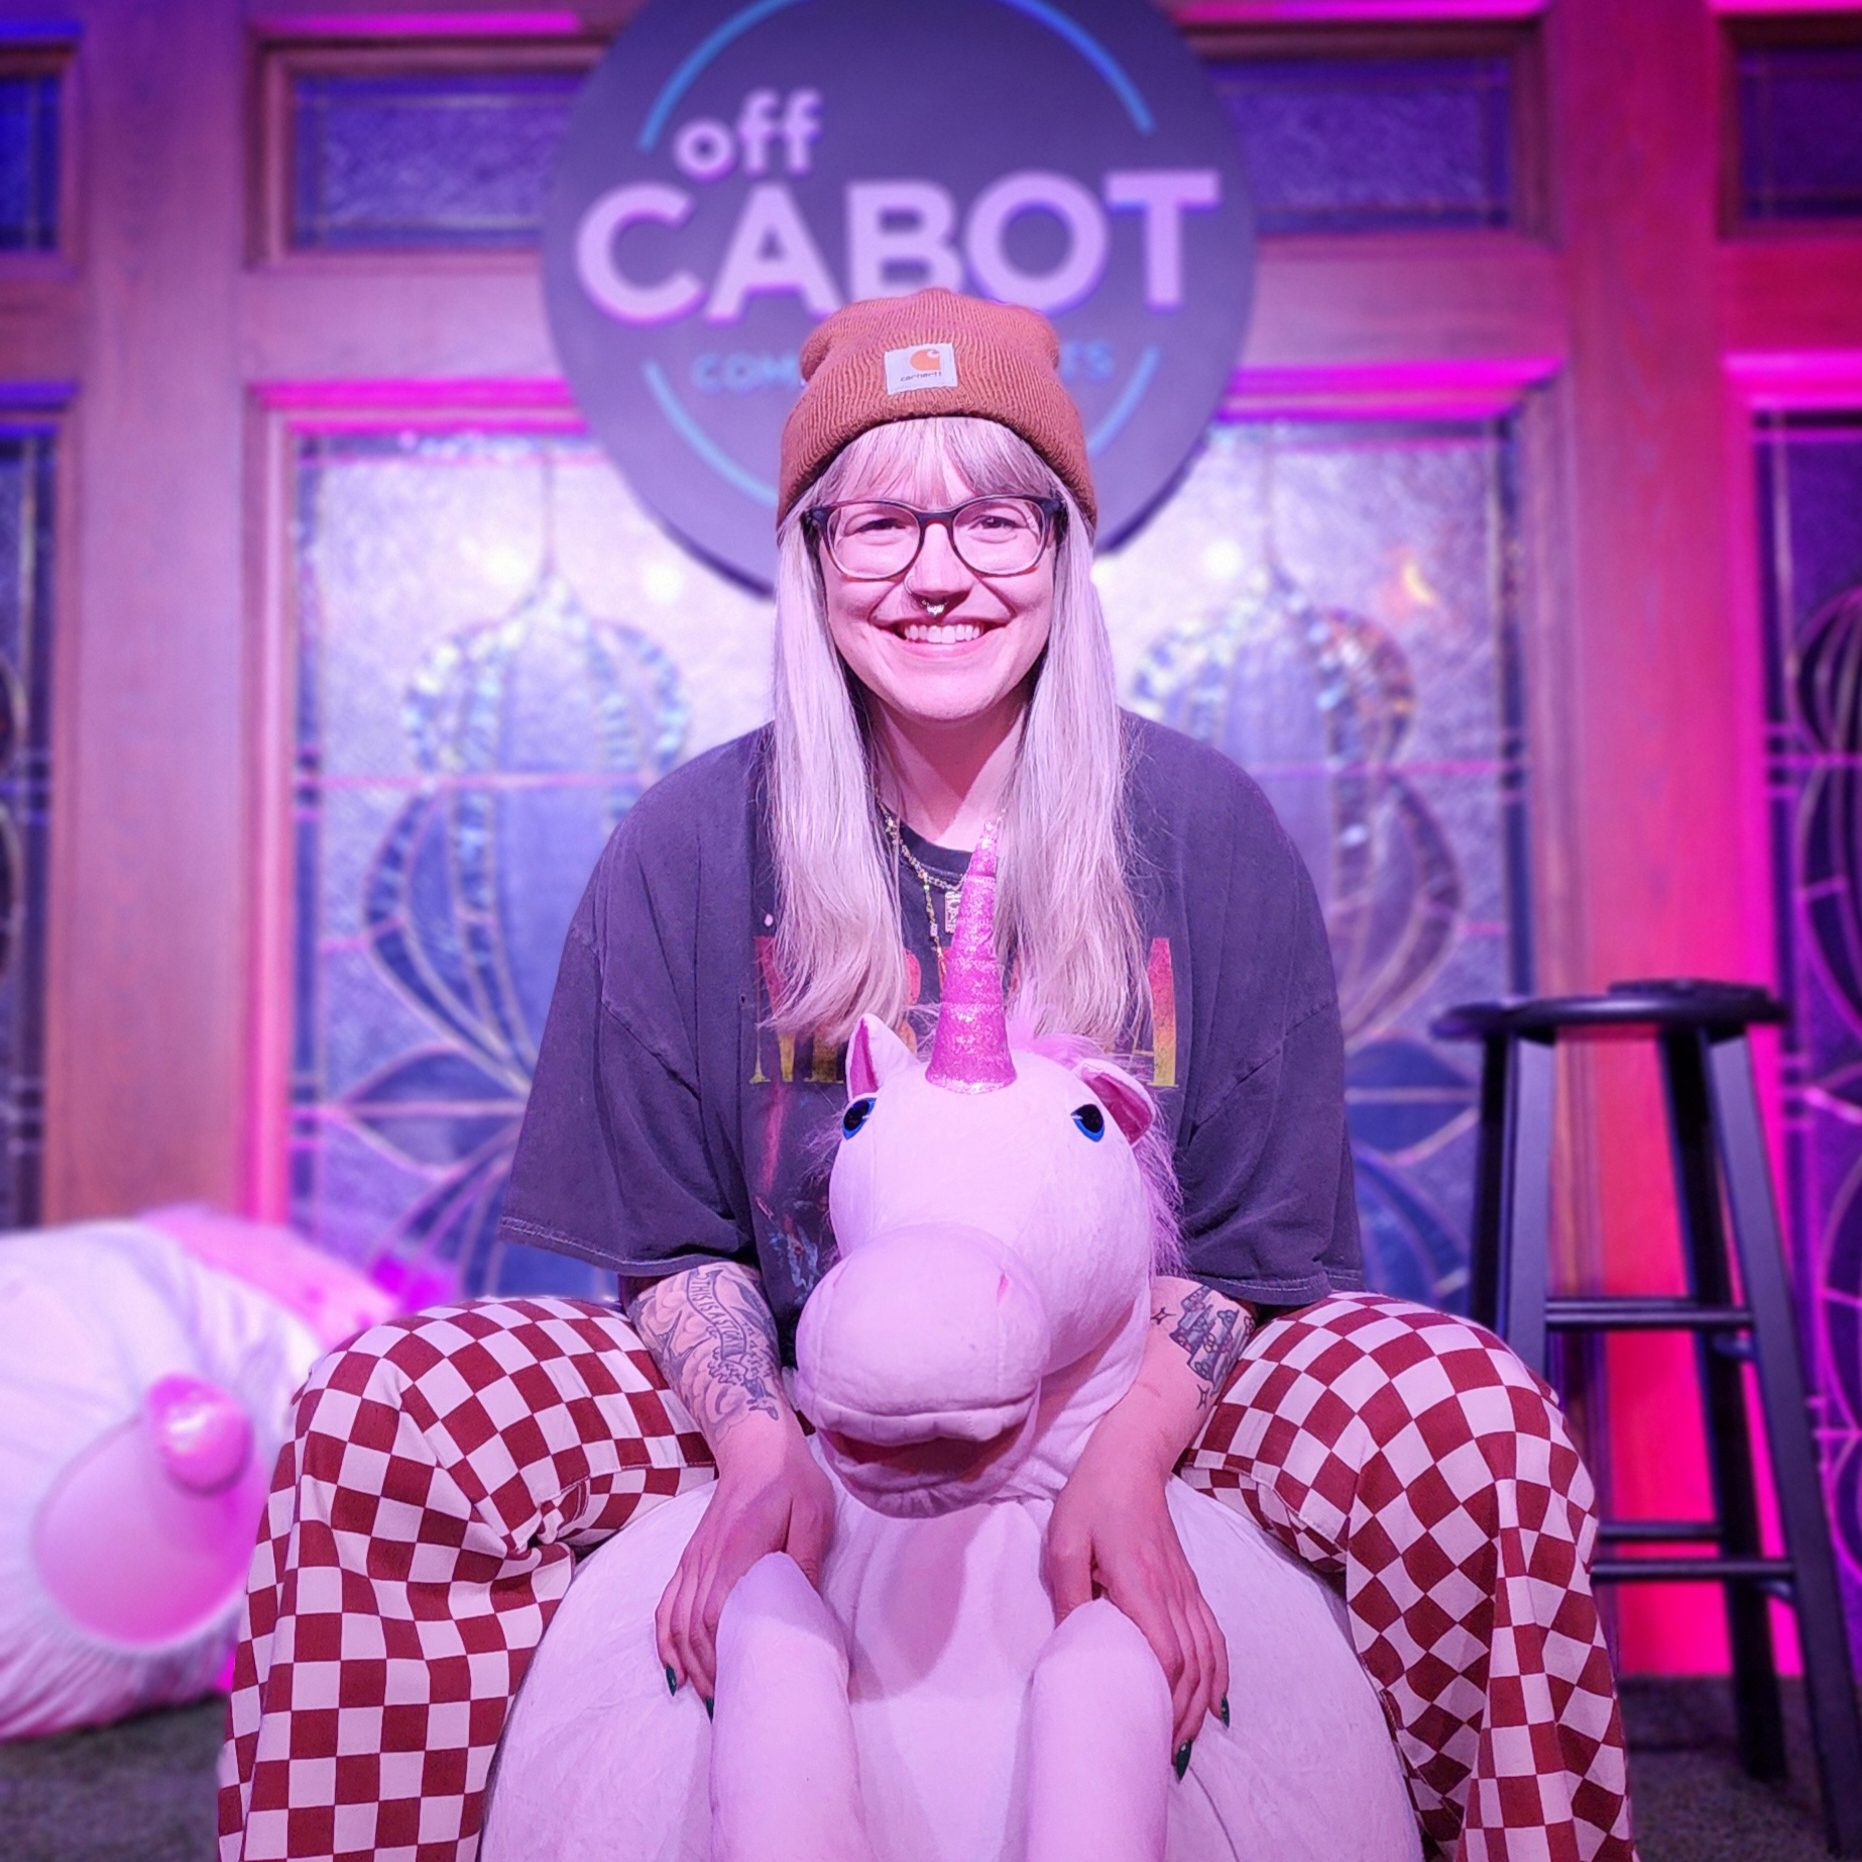 A cheerful woman sitting comfortably on a fluffy unicorn chair, surrounded by a room illuminated with soft purple light.